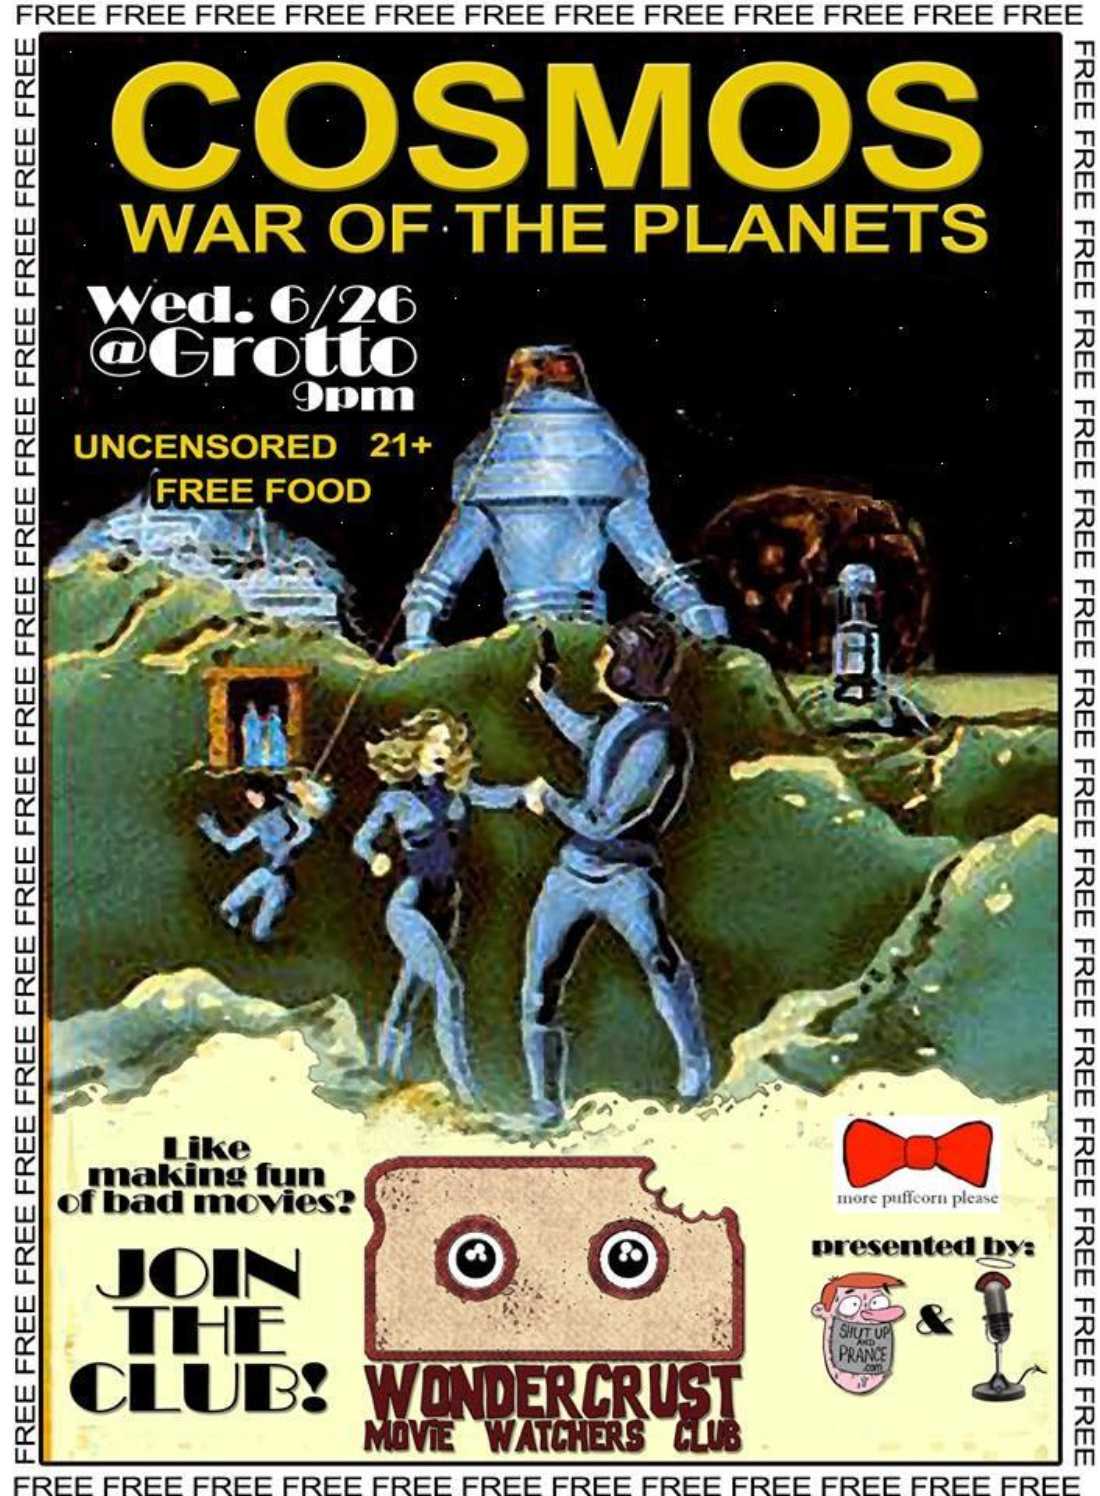 War of the Planets screens tonight at 10pm at The Grotto.